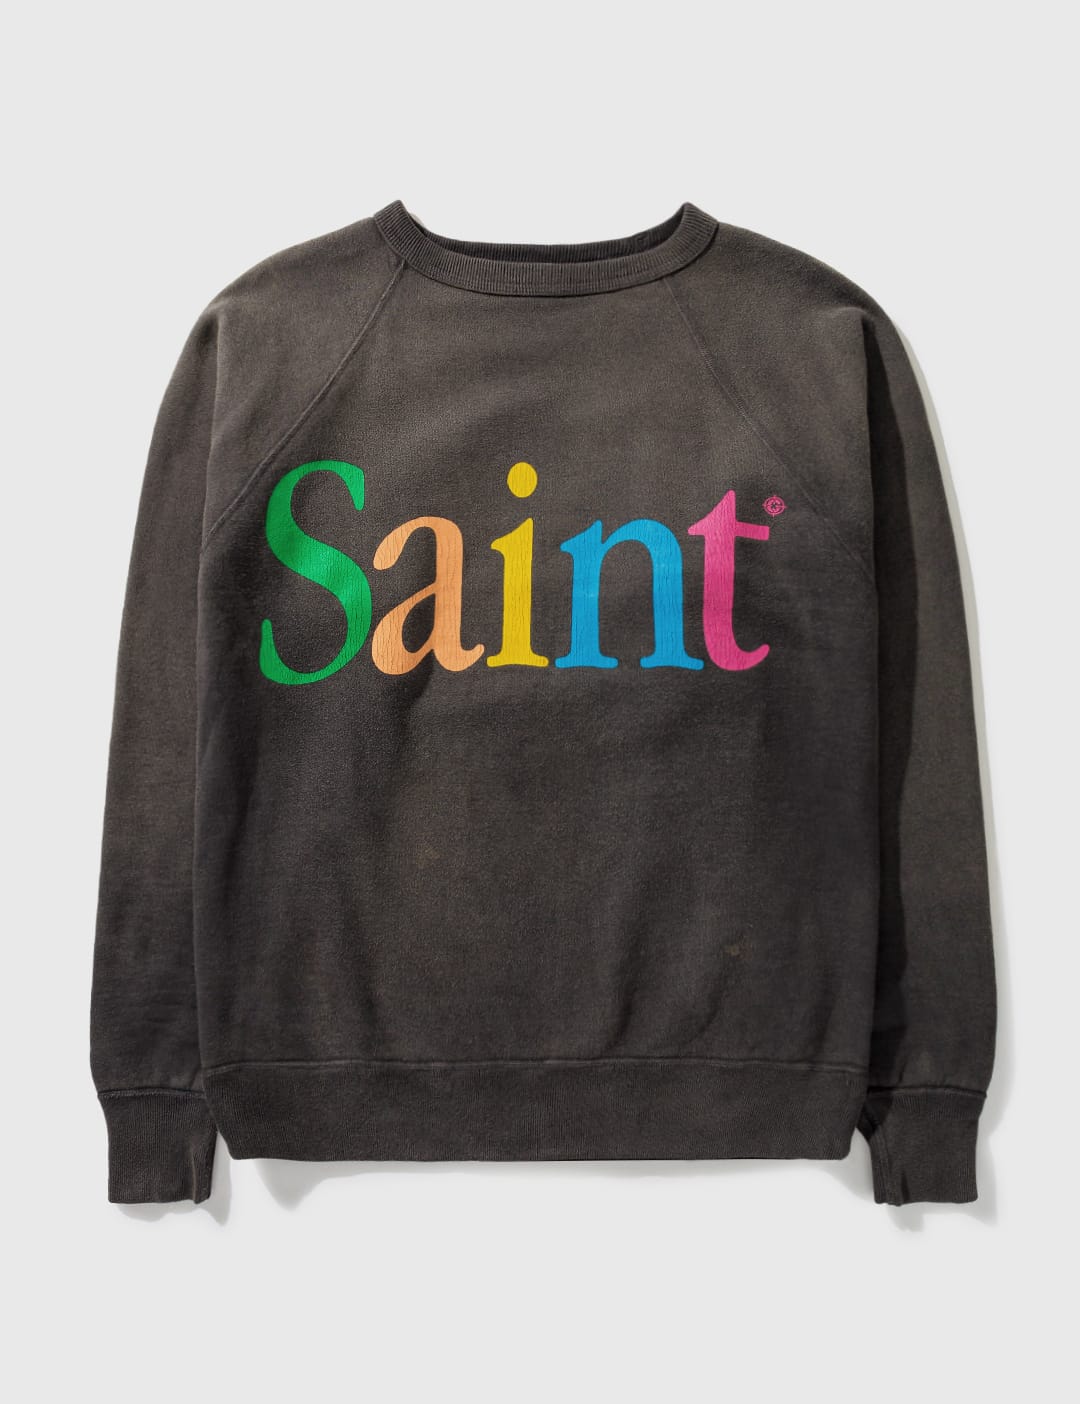 Saint Michael | HBX - Globally Curated Fashion and Lifestyle by 